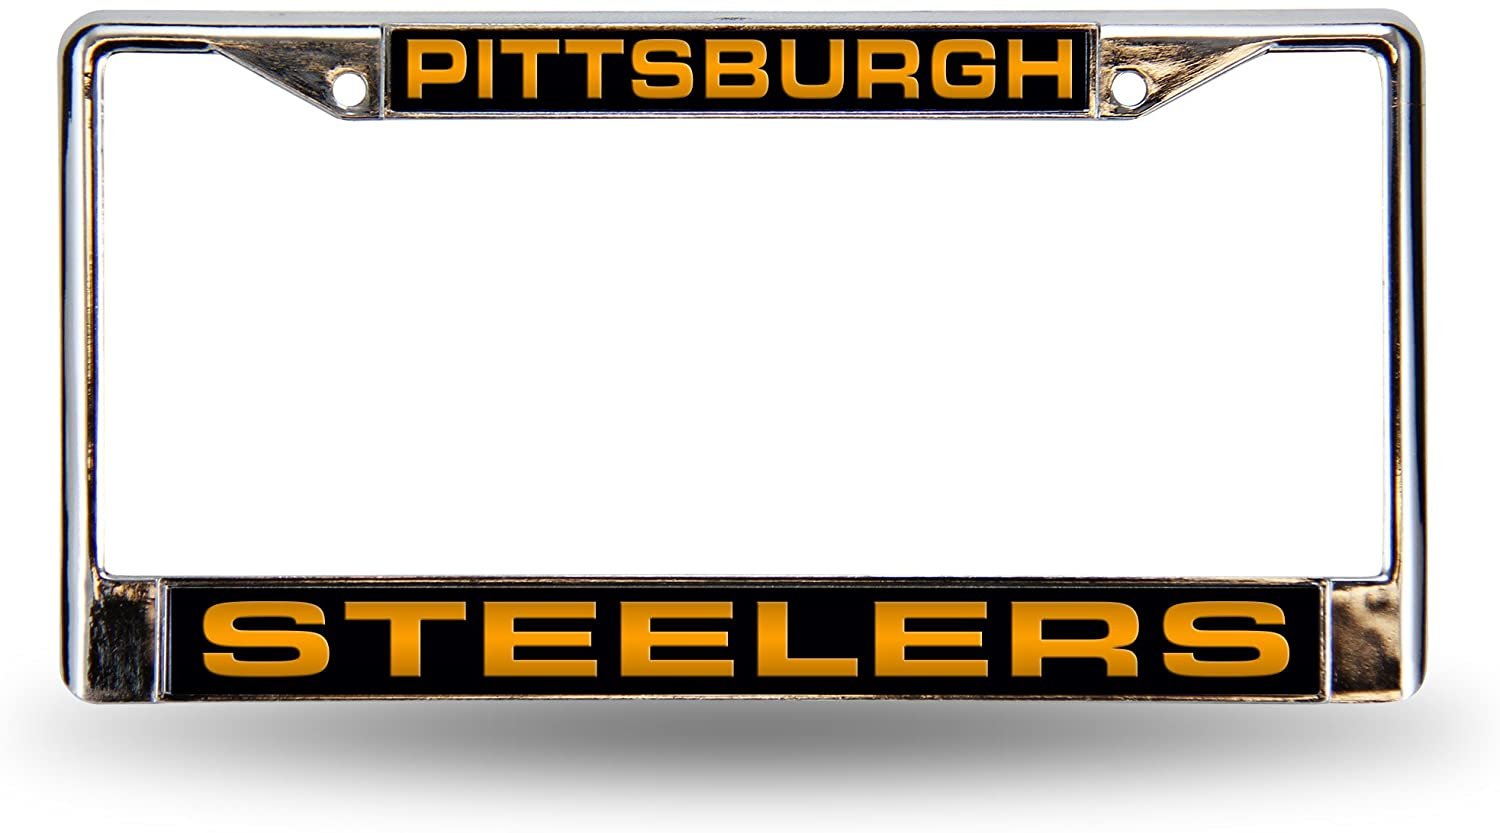 Pittsburgh Steelers Chrome Metal License Plate Frame Tag Cover, Laser Acrylic Mirrored Inserts, 12x6 Inch